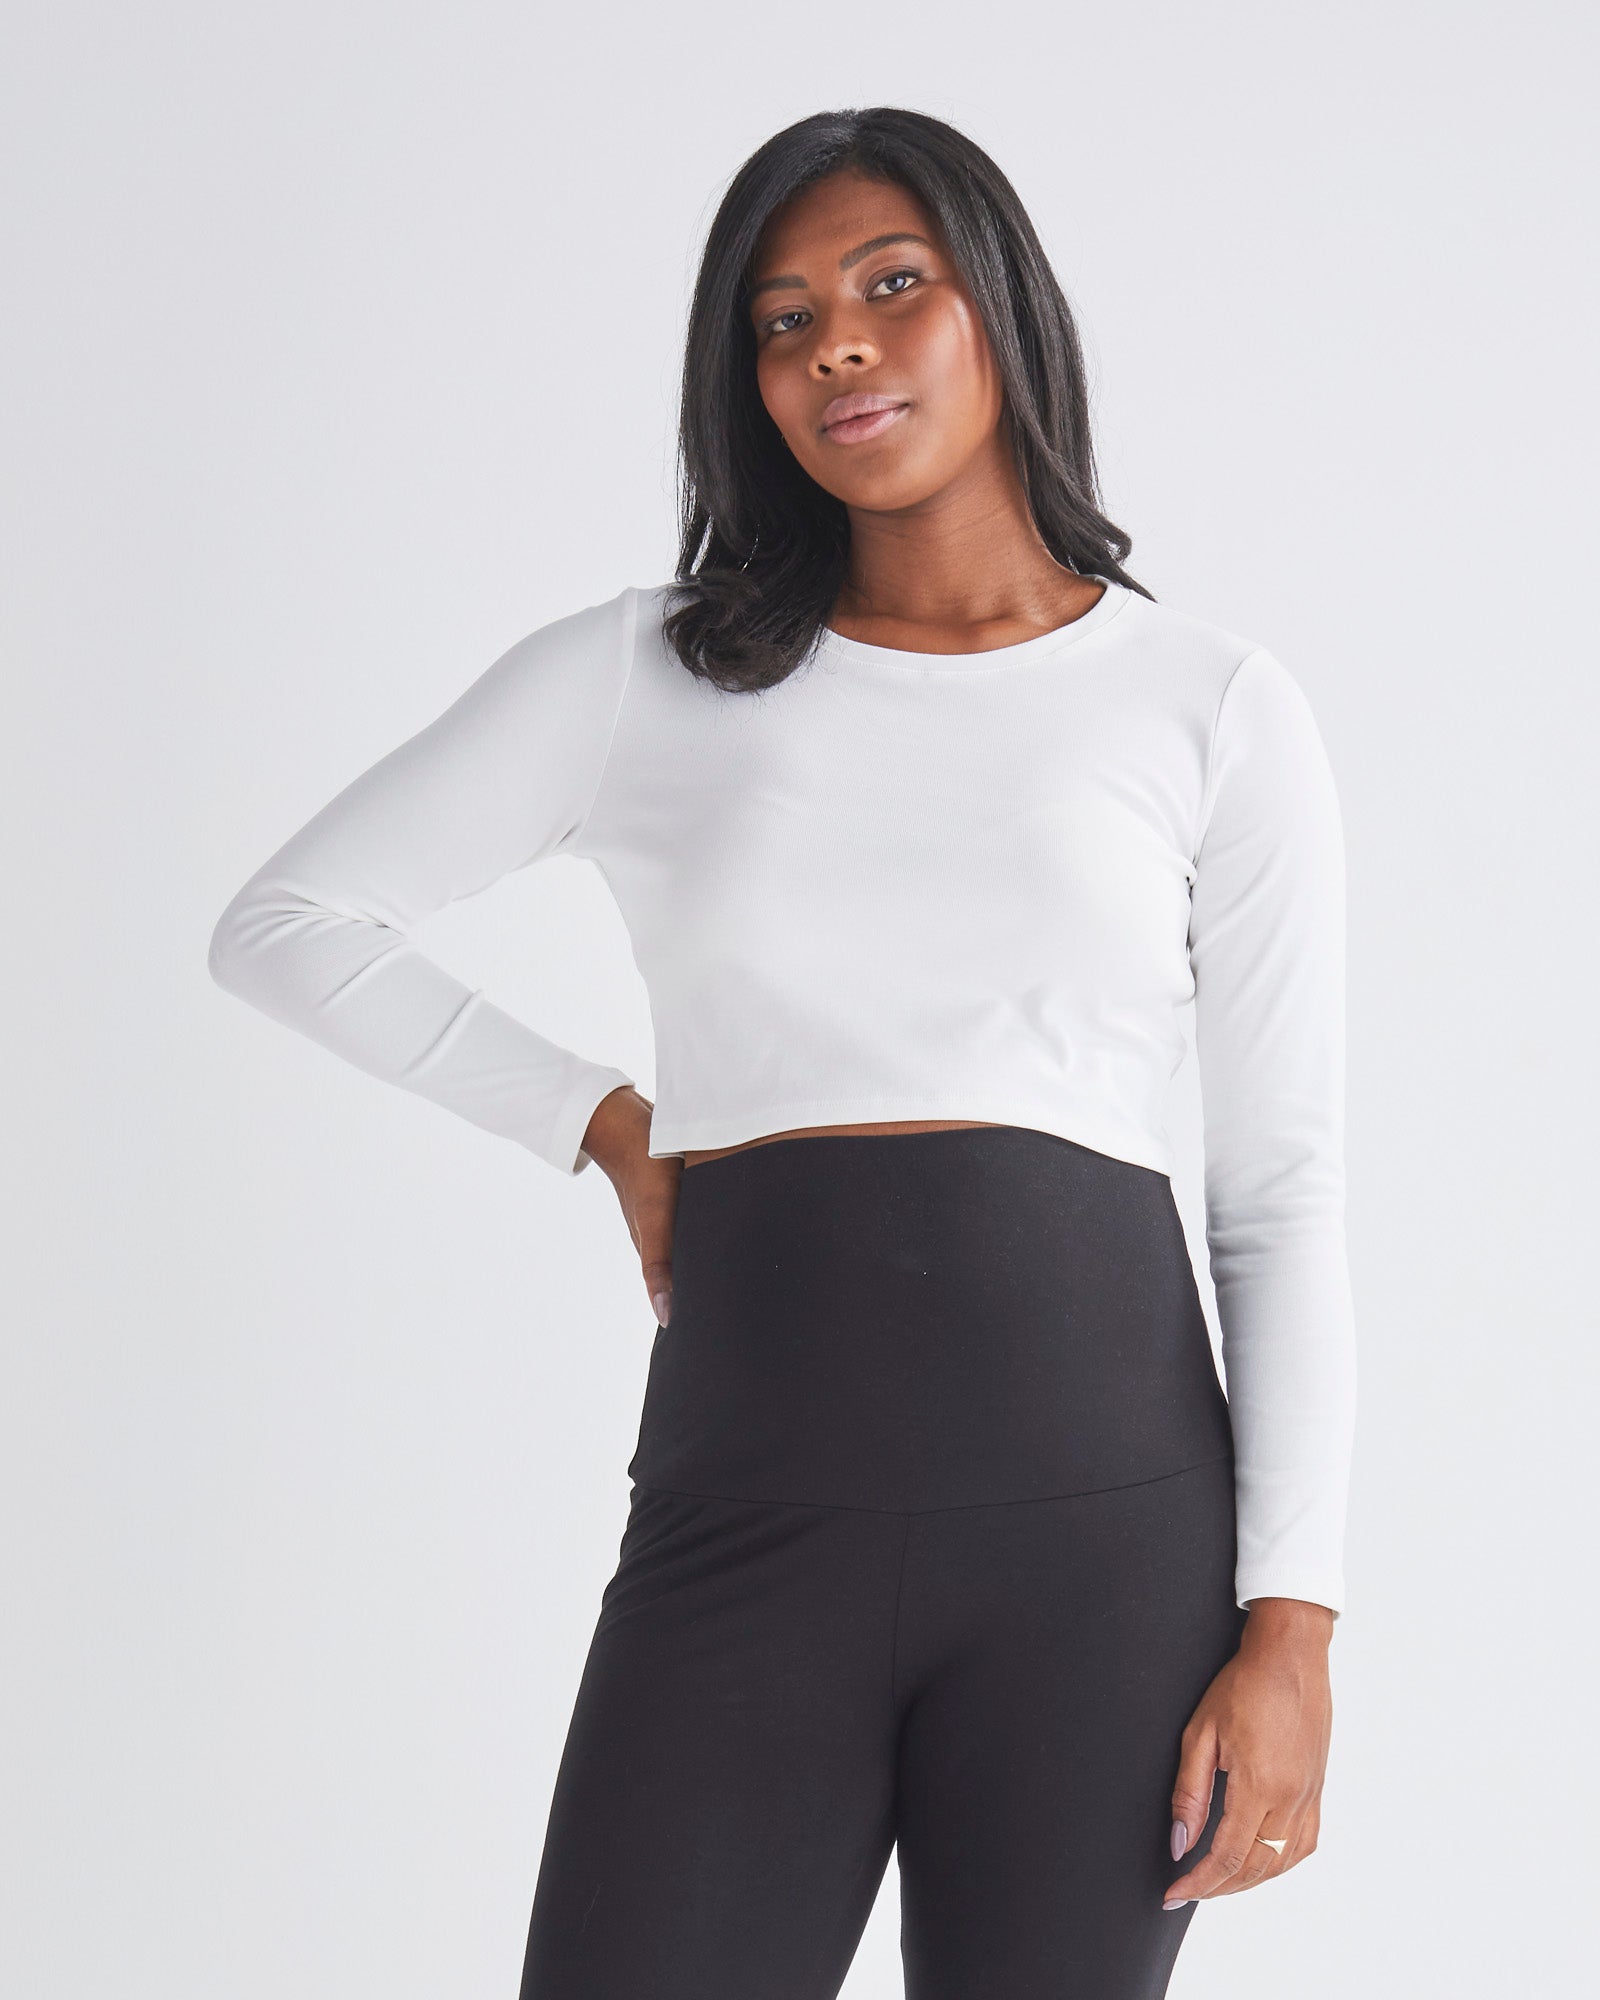 A Pregnant Woman Wearing Maternity Long Sleeve Cotton Crop Tee in White from Angel Maternity